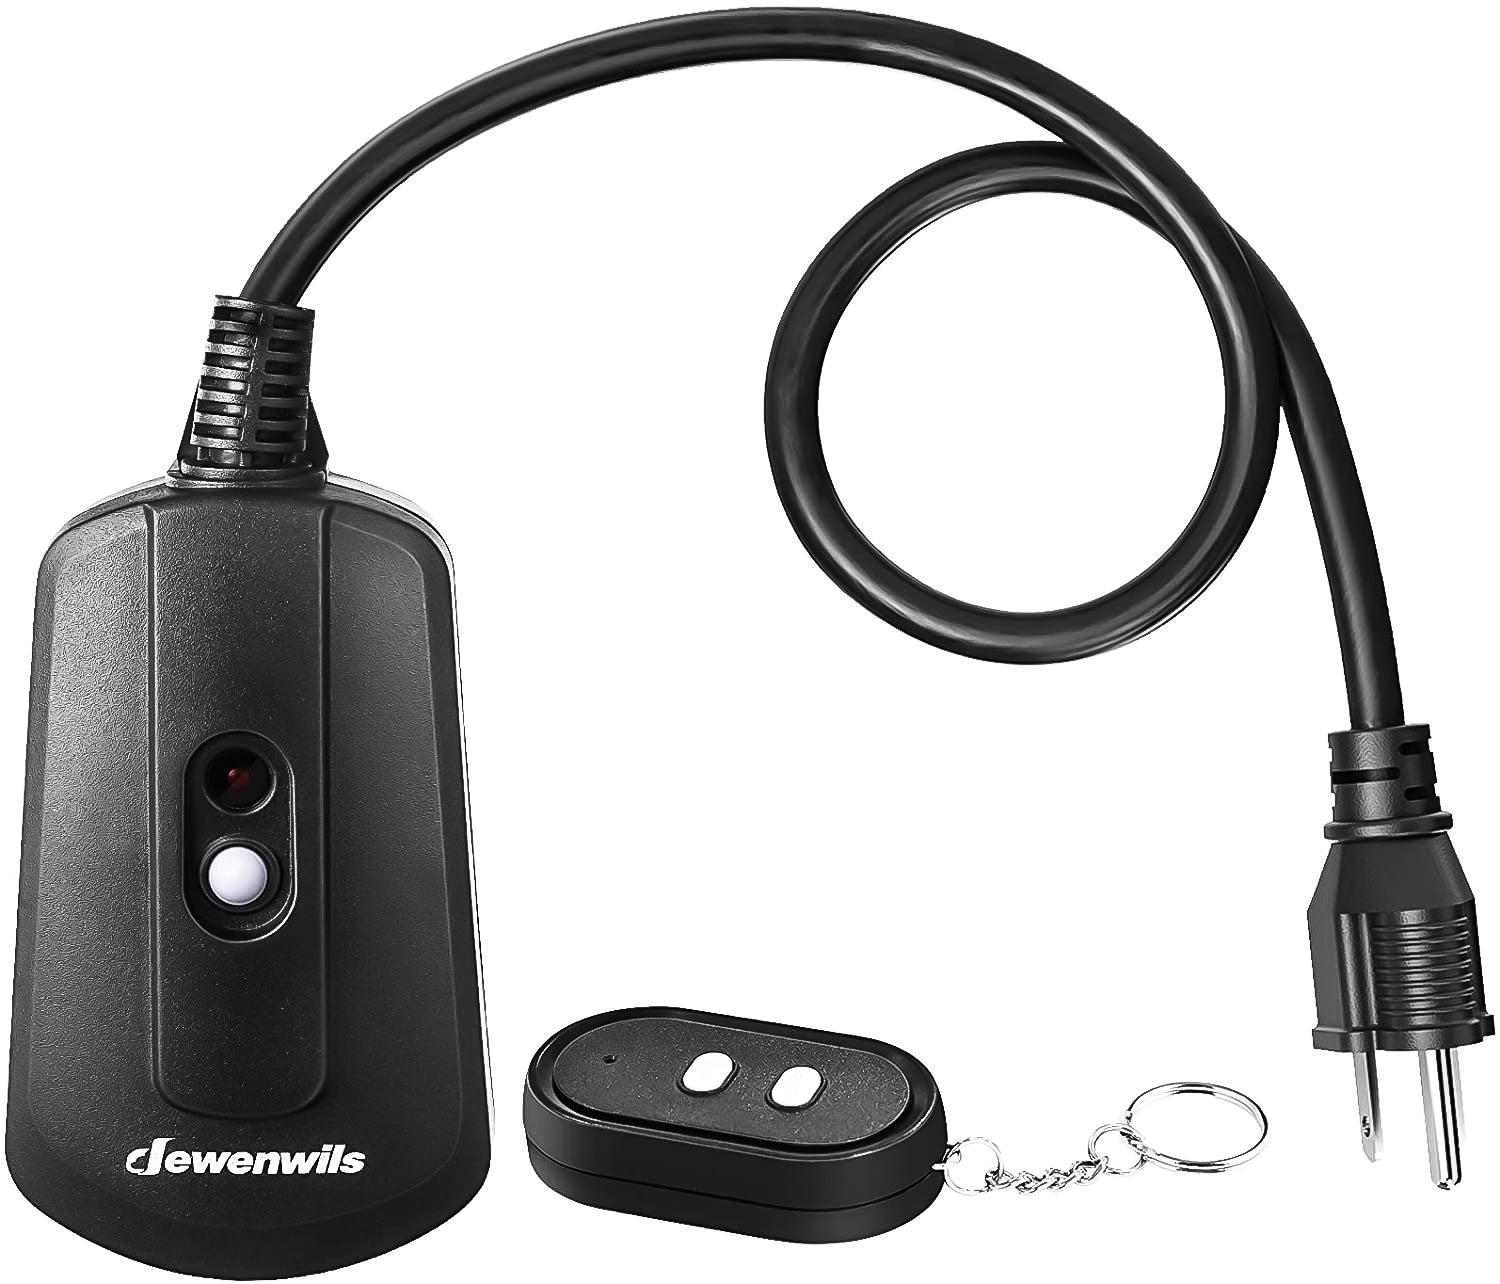 DEWENWILS Outdoor Remote Control Outlet with 2 FT Long Extension Cord. (LNC)